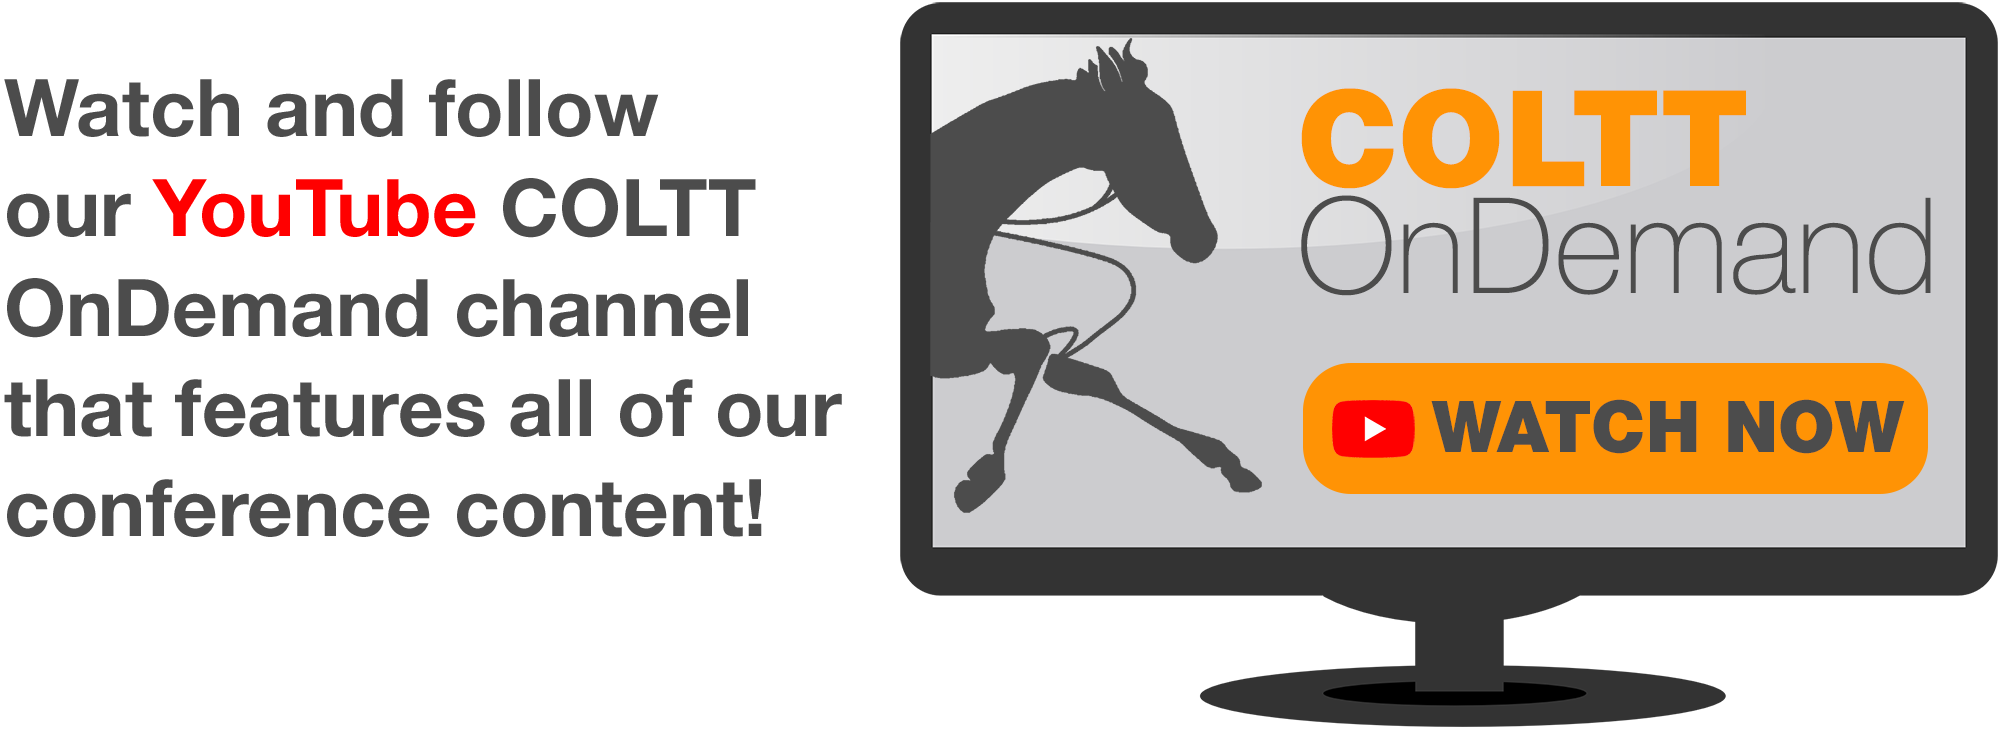 Watch and follow our YouTube COLTT OnDemand channel that features all of our conference content!